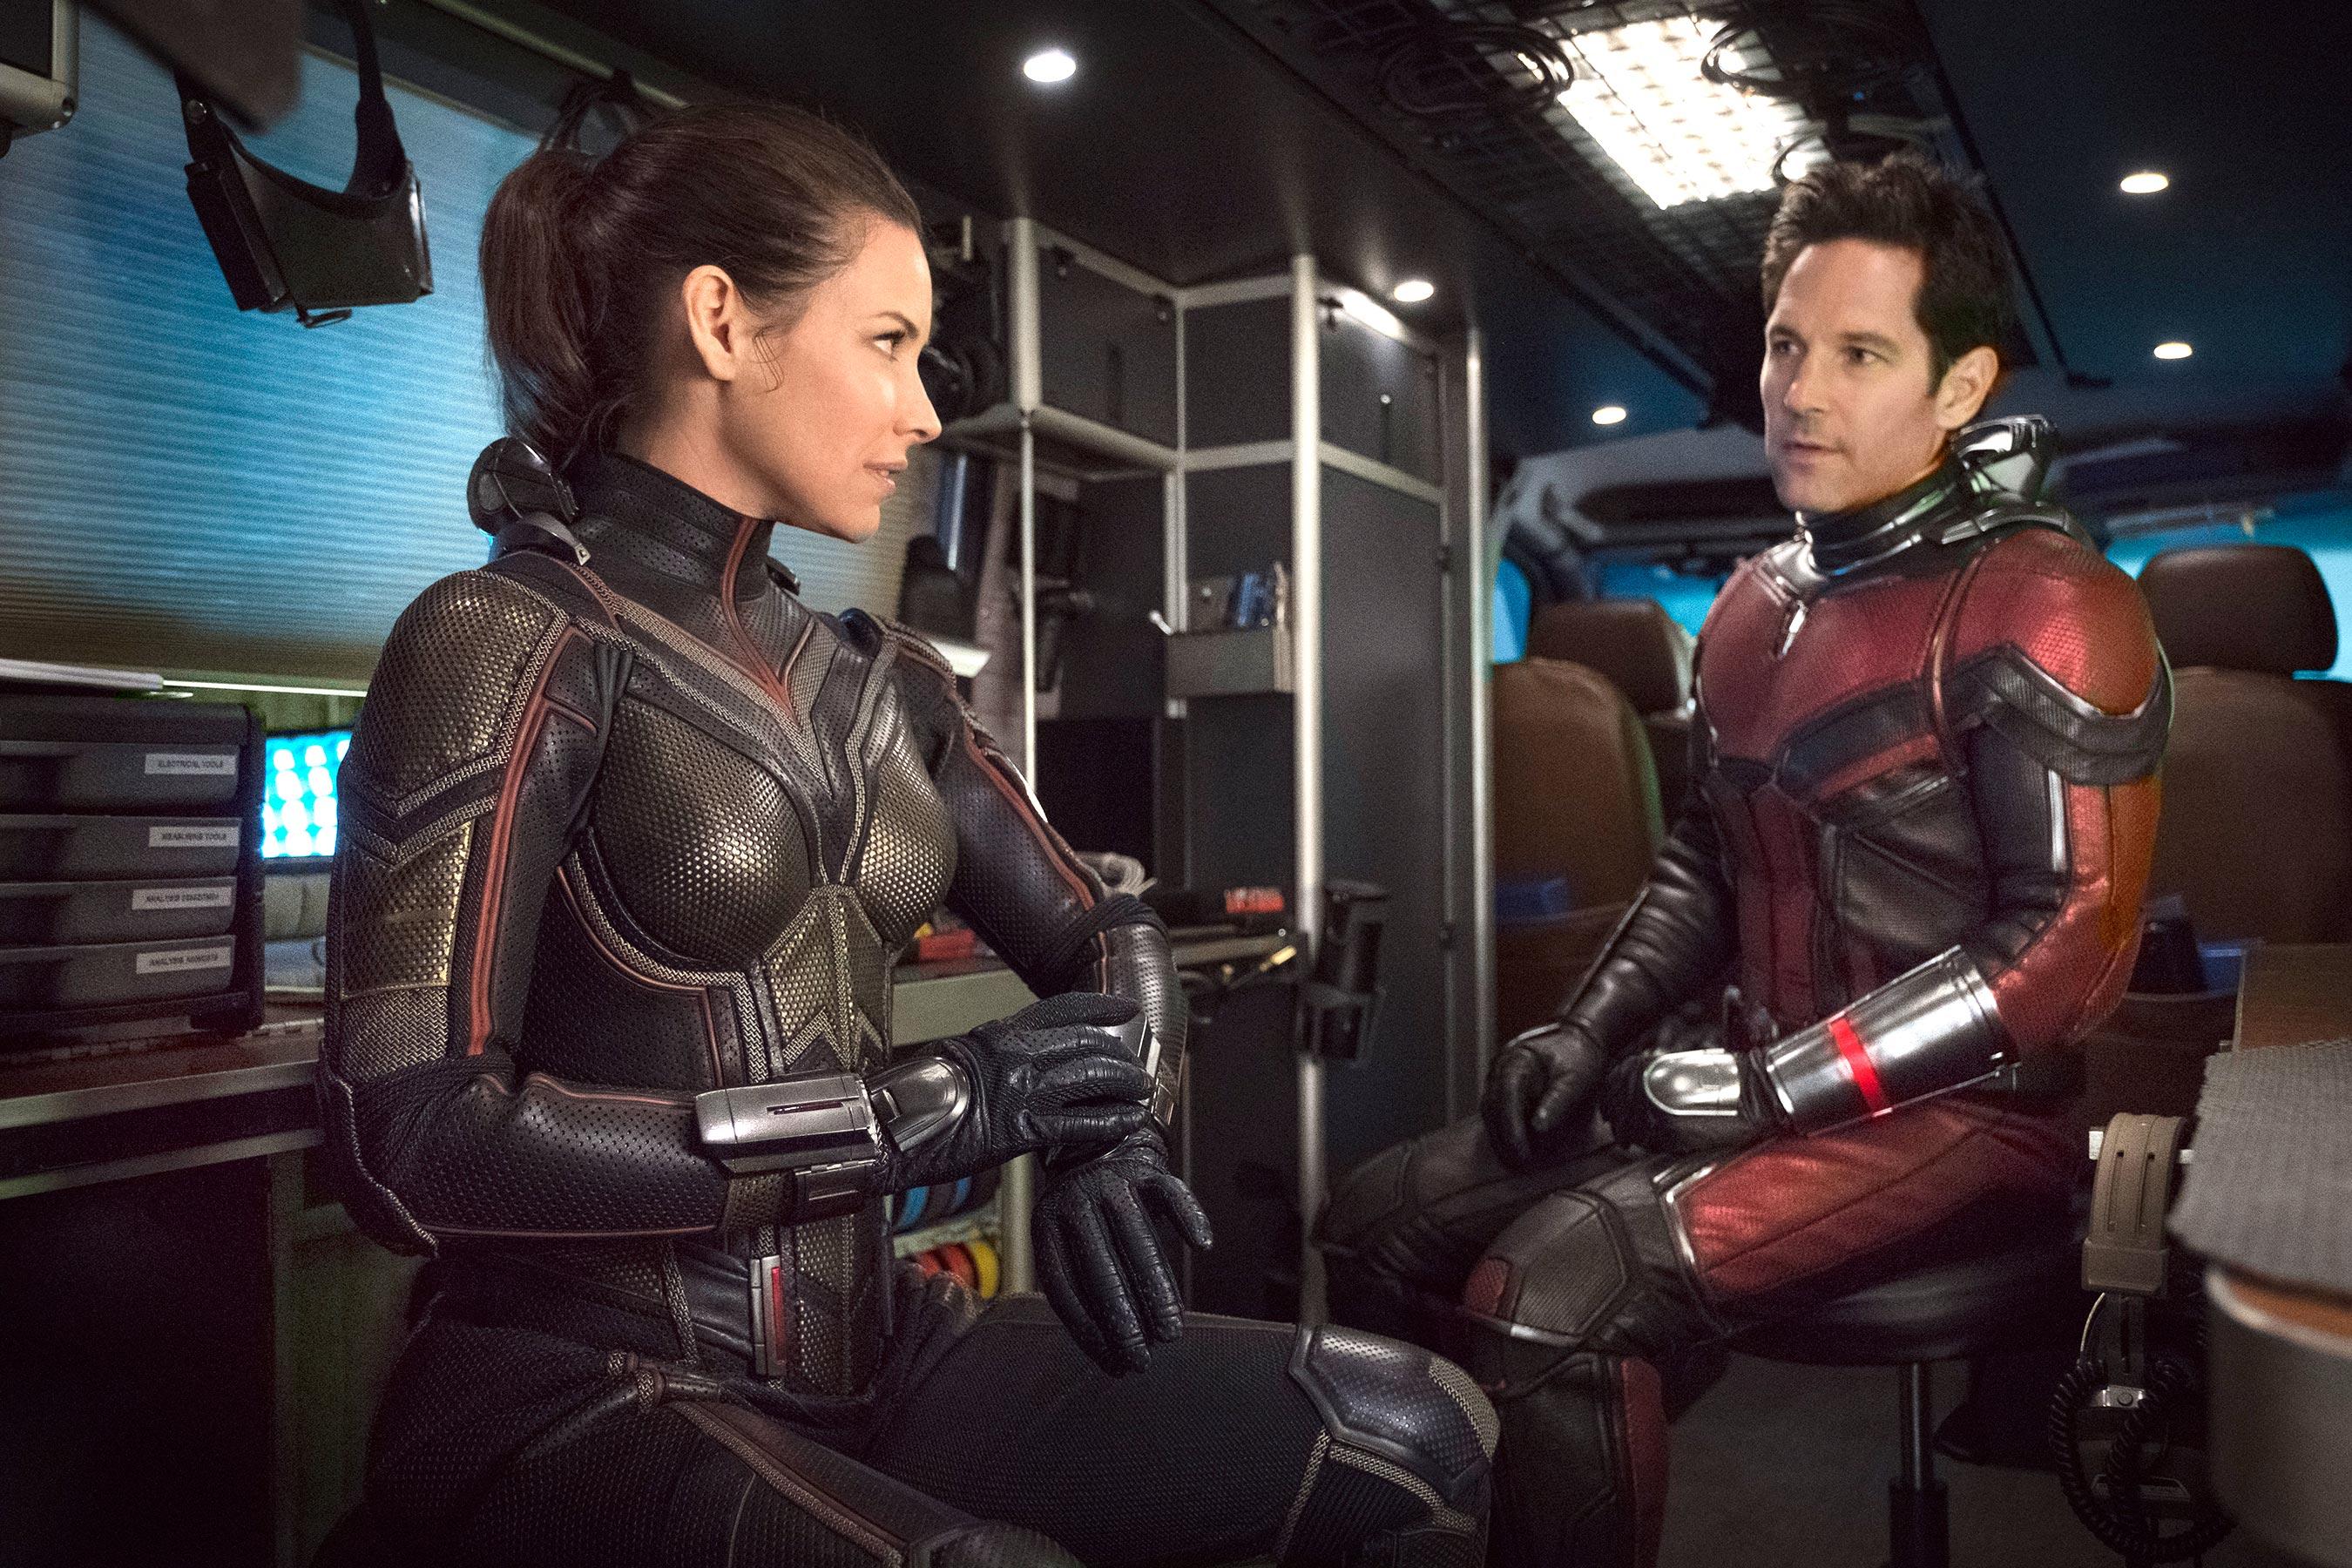 Ant Man And The Wasp Image Tease Quantum Realm, Ghost